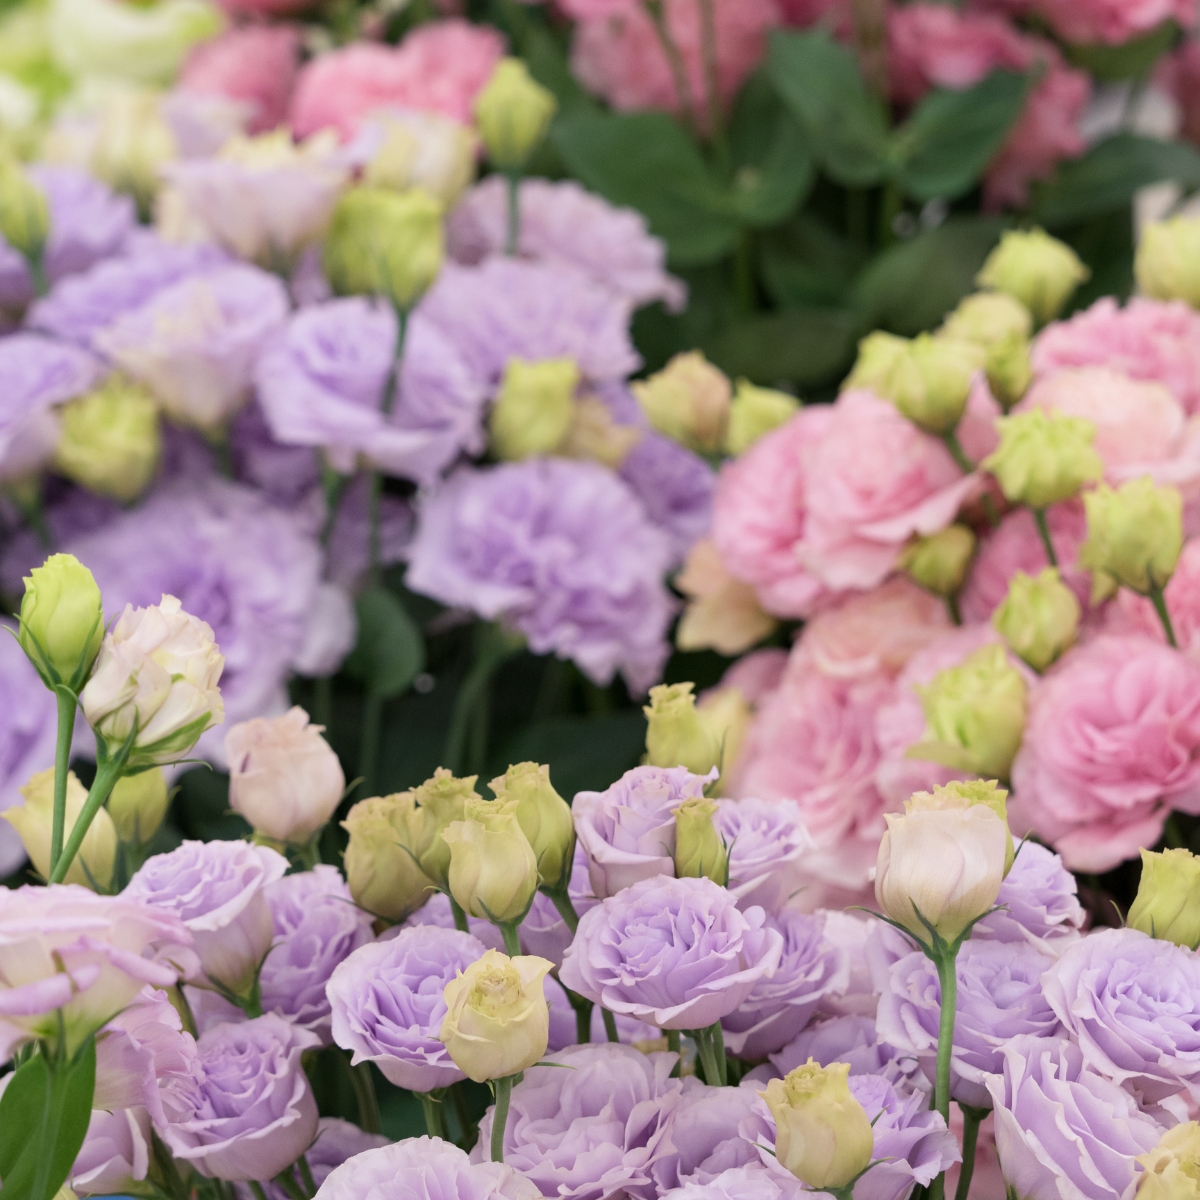 various colors of lisianthus in bloom